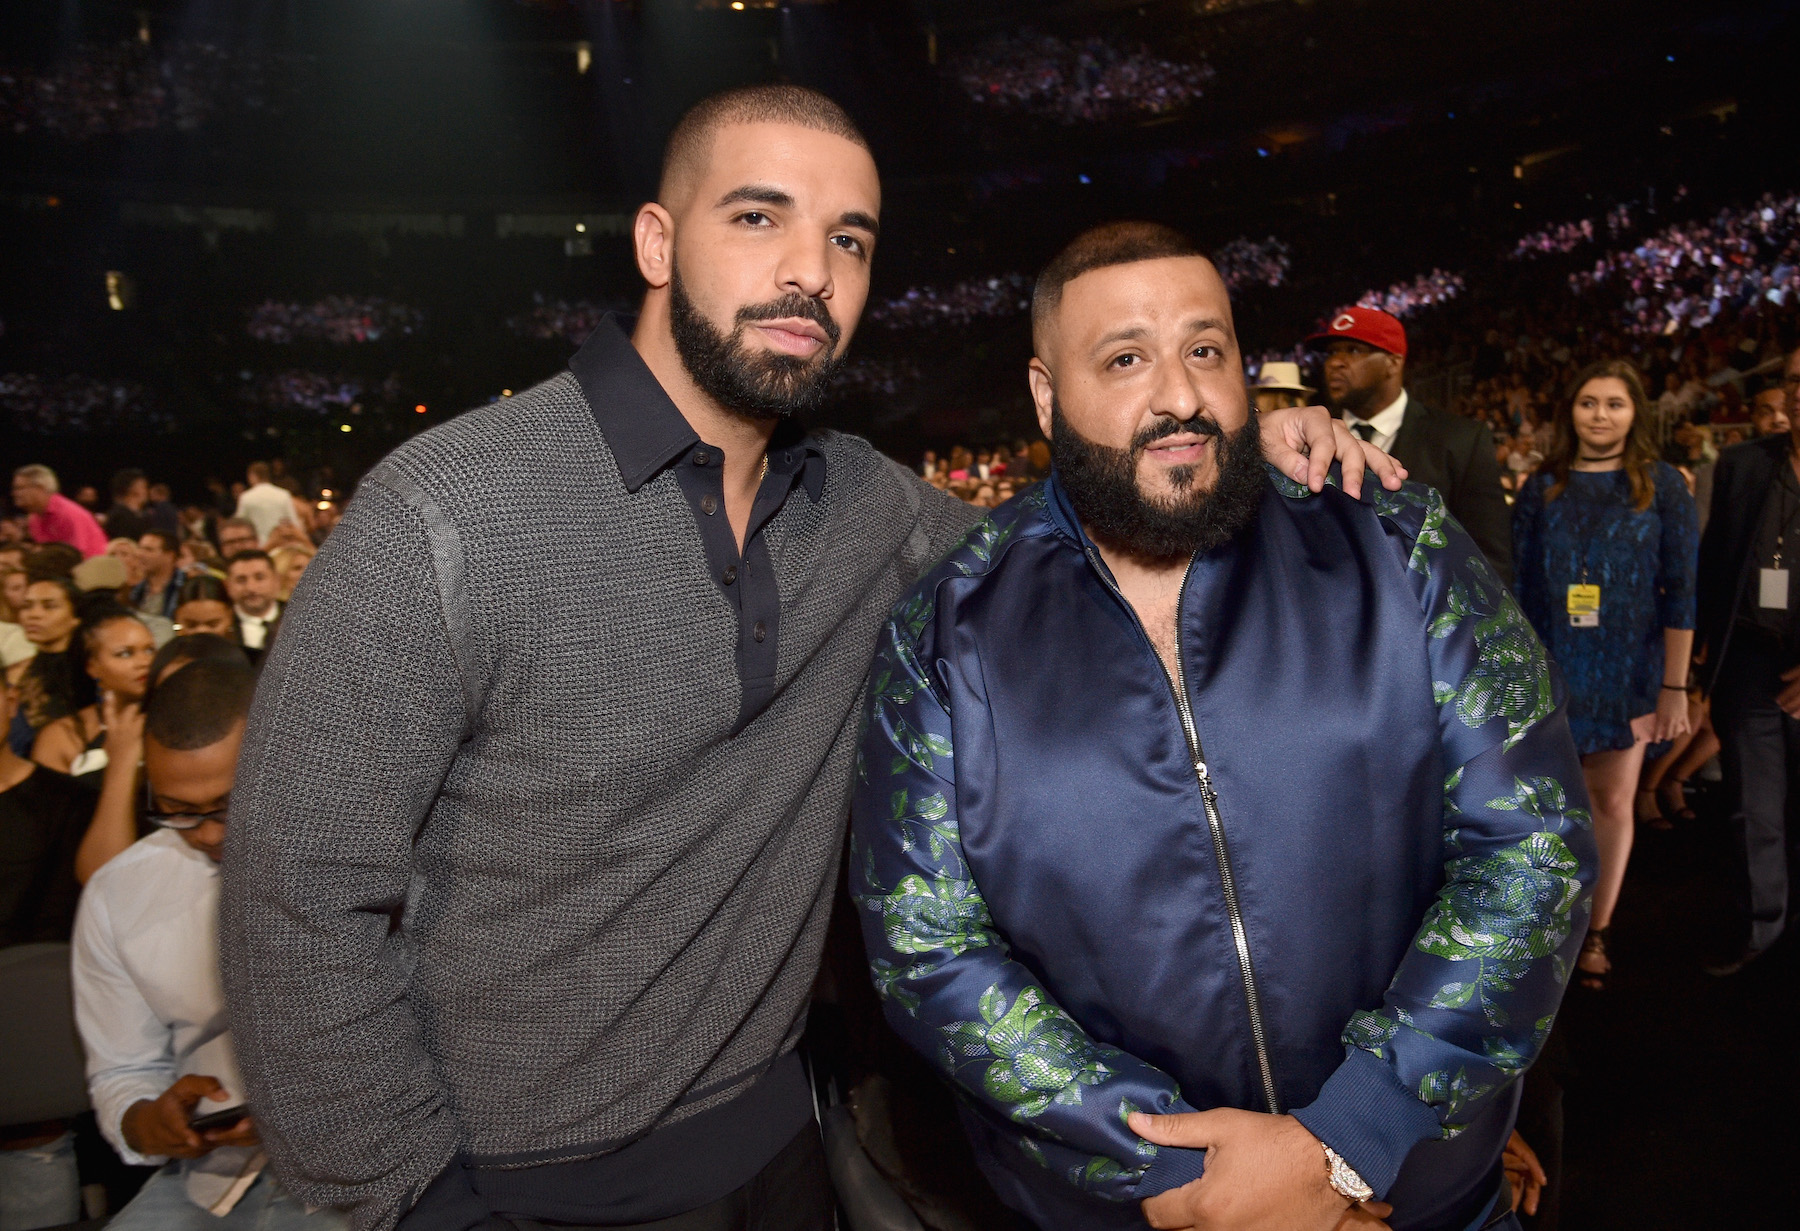 Drake and DJ Khaled posing for a photo together